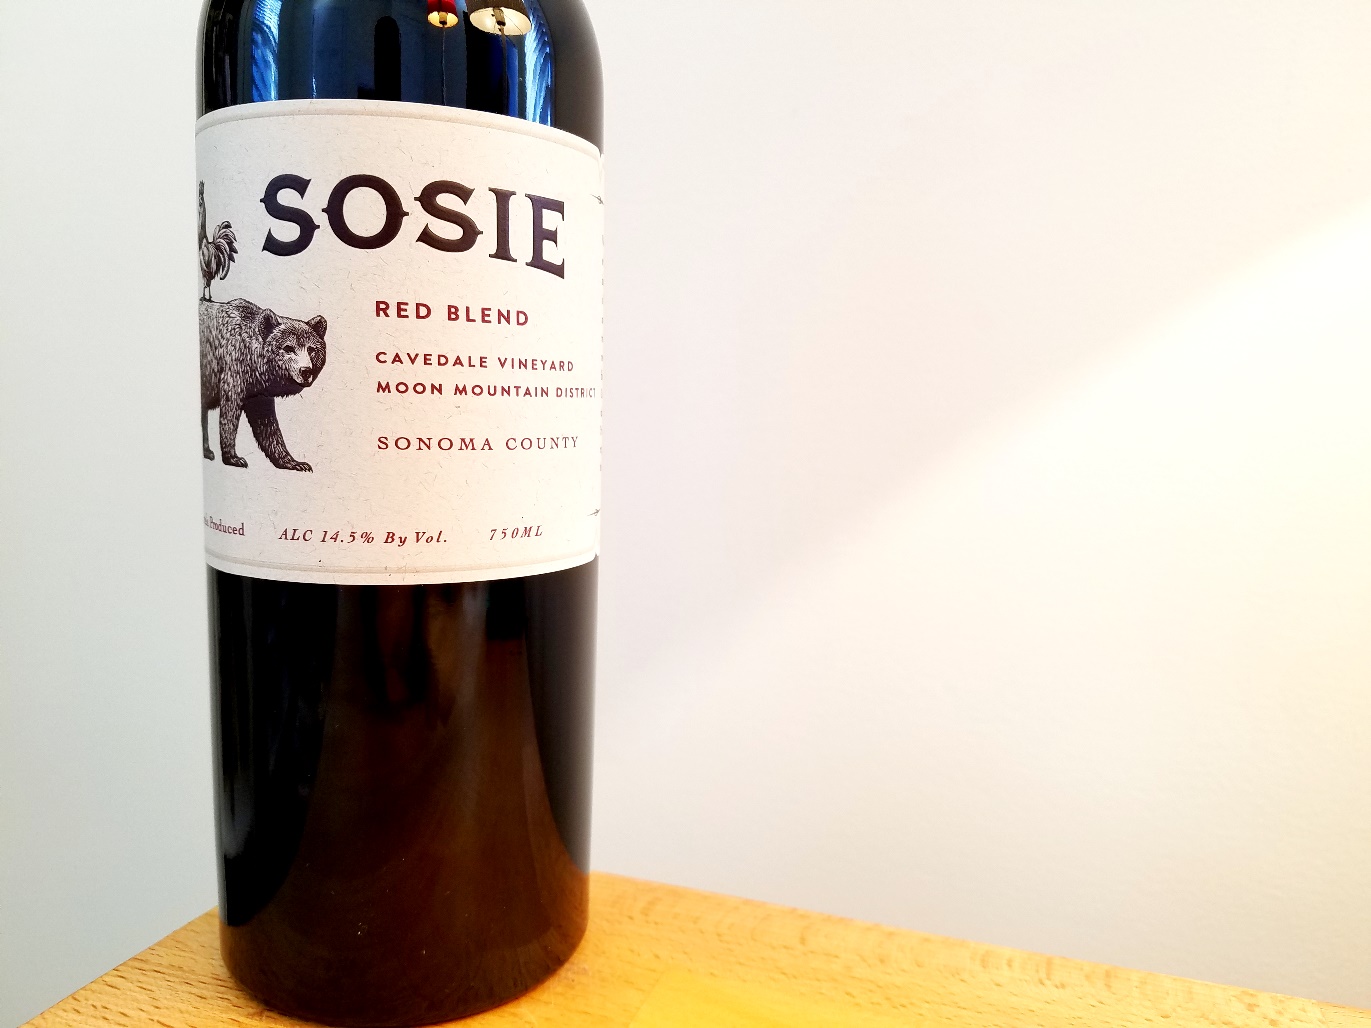 Sosie, Red Blend 2017, Cavedale Vineyard, Moon Mountain District, Sonoma County, California, Wine Casual